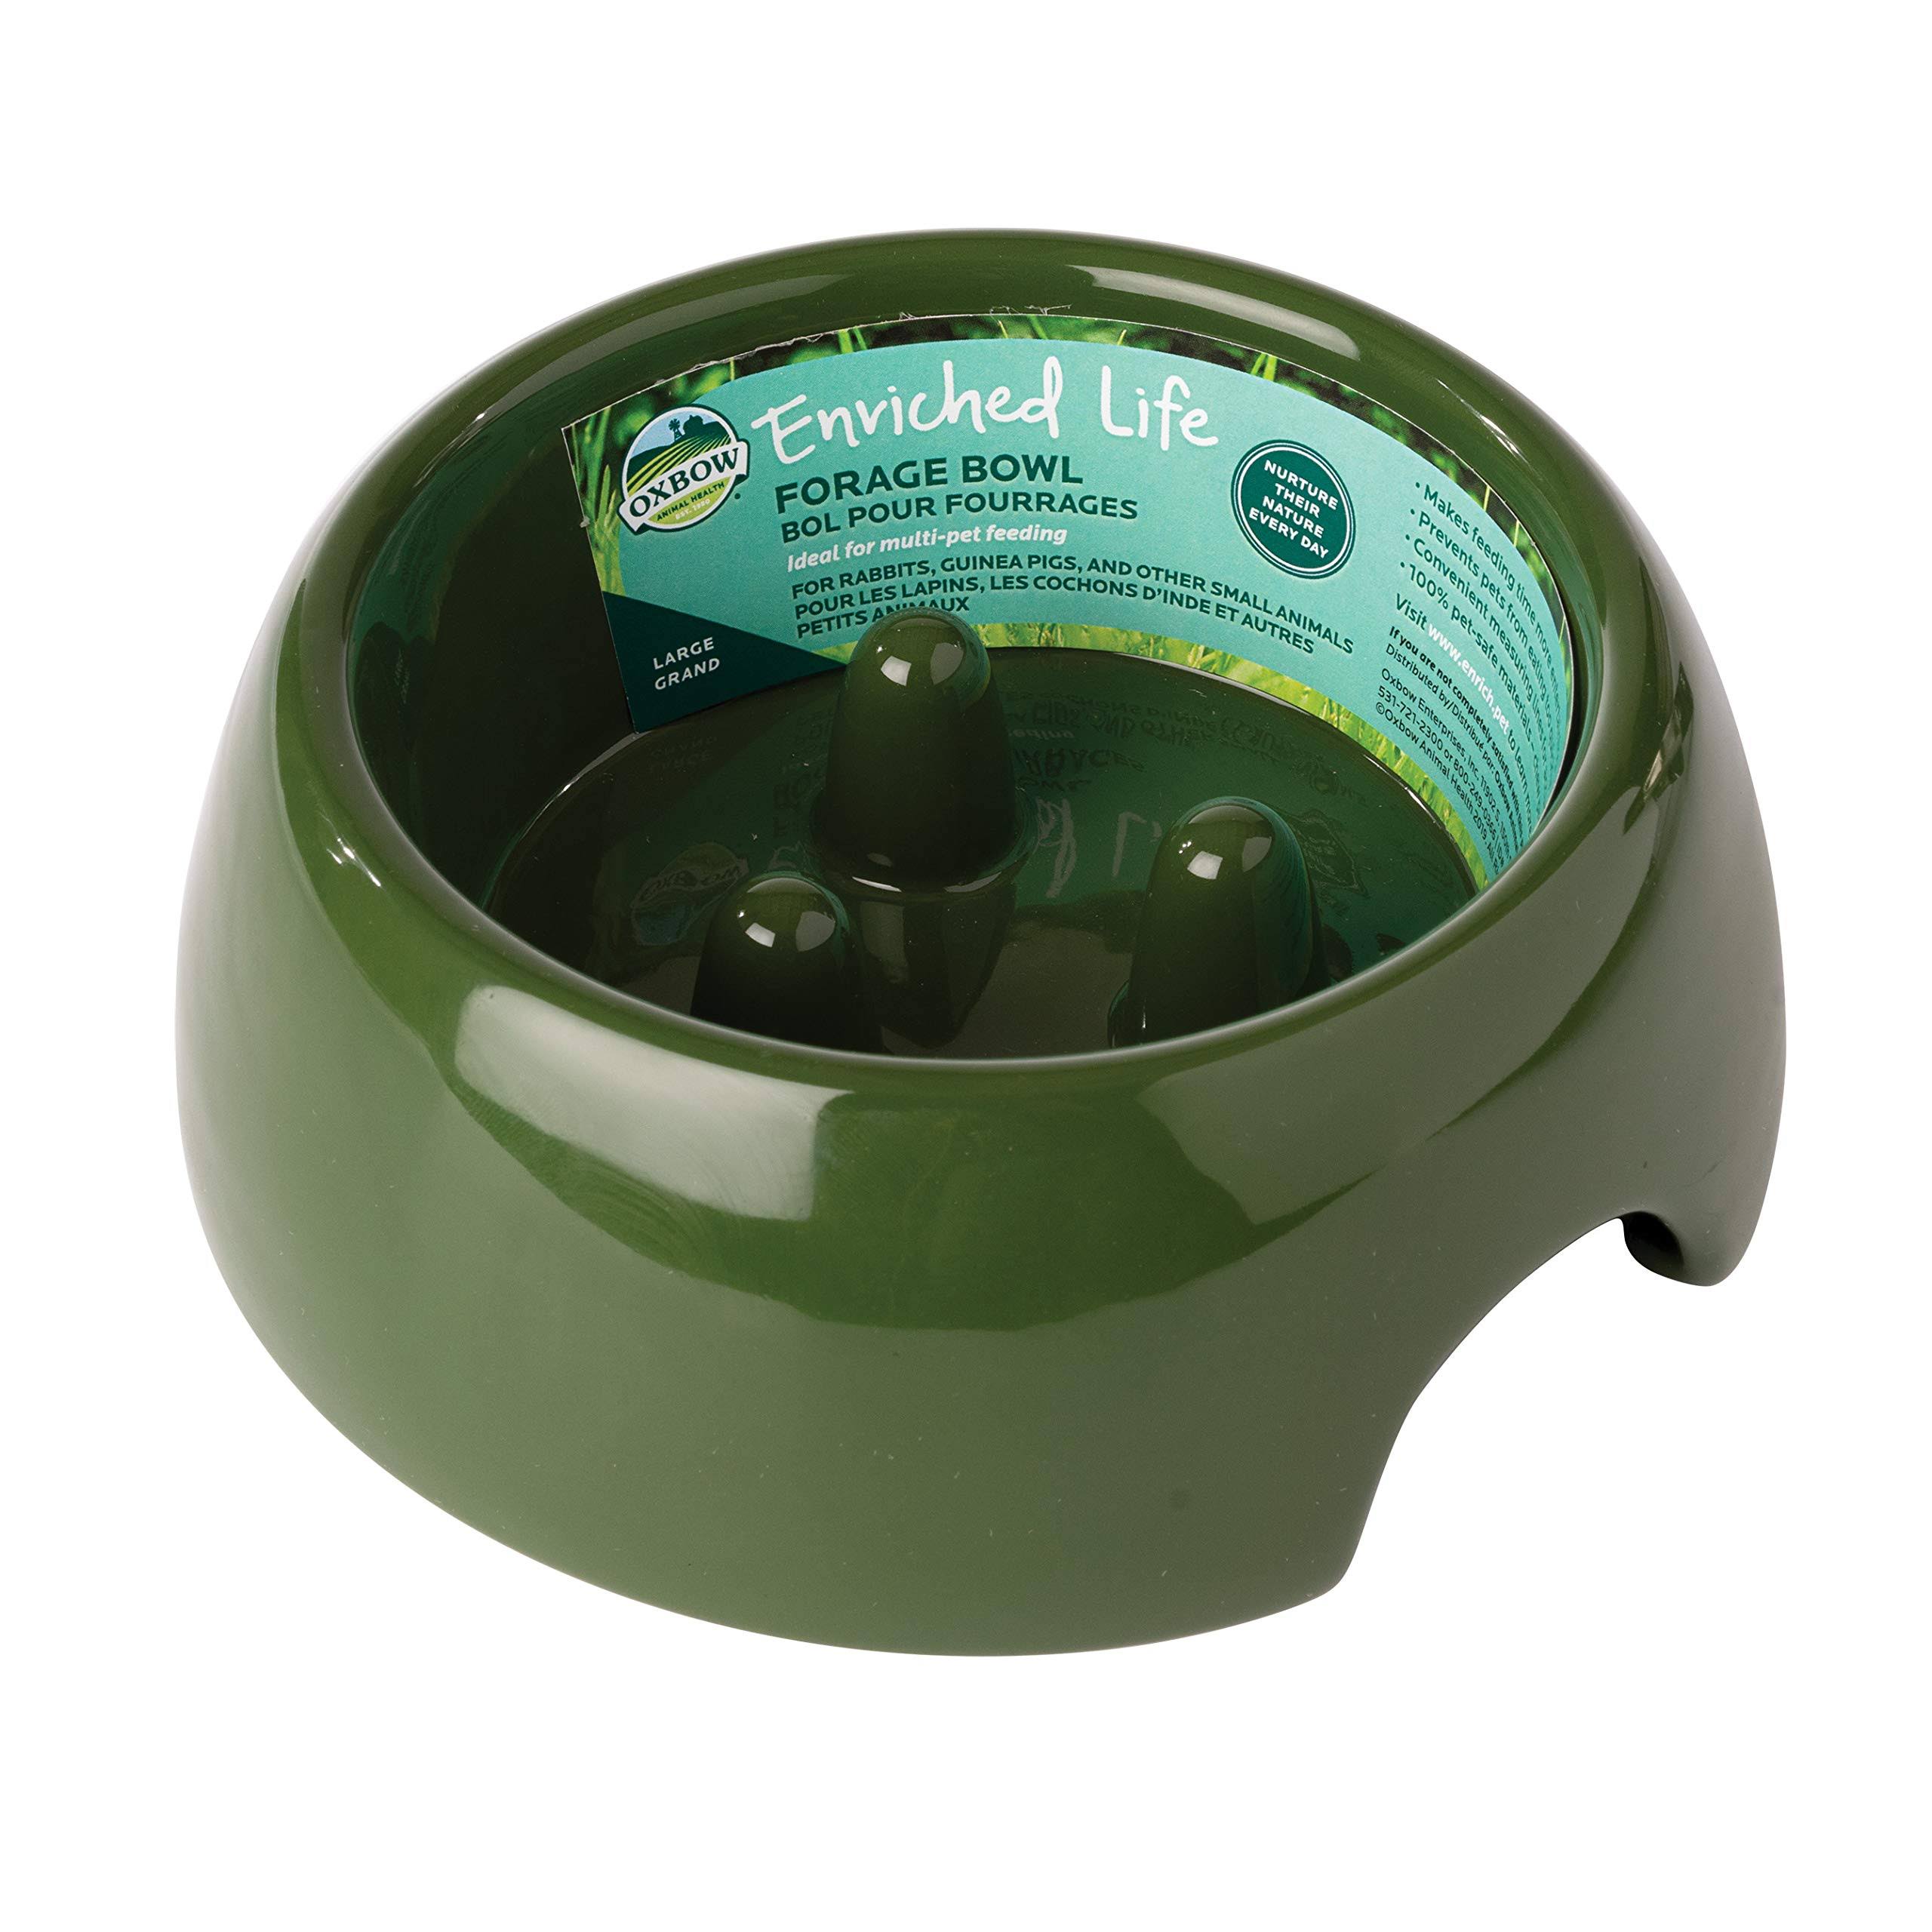 Oxbow Enriched Life Forage Small Pet Bowl, Large